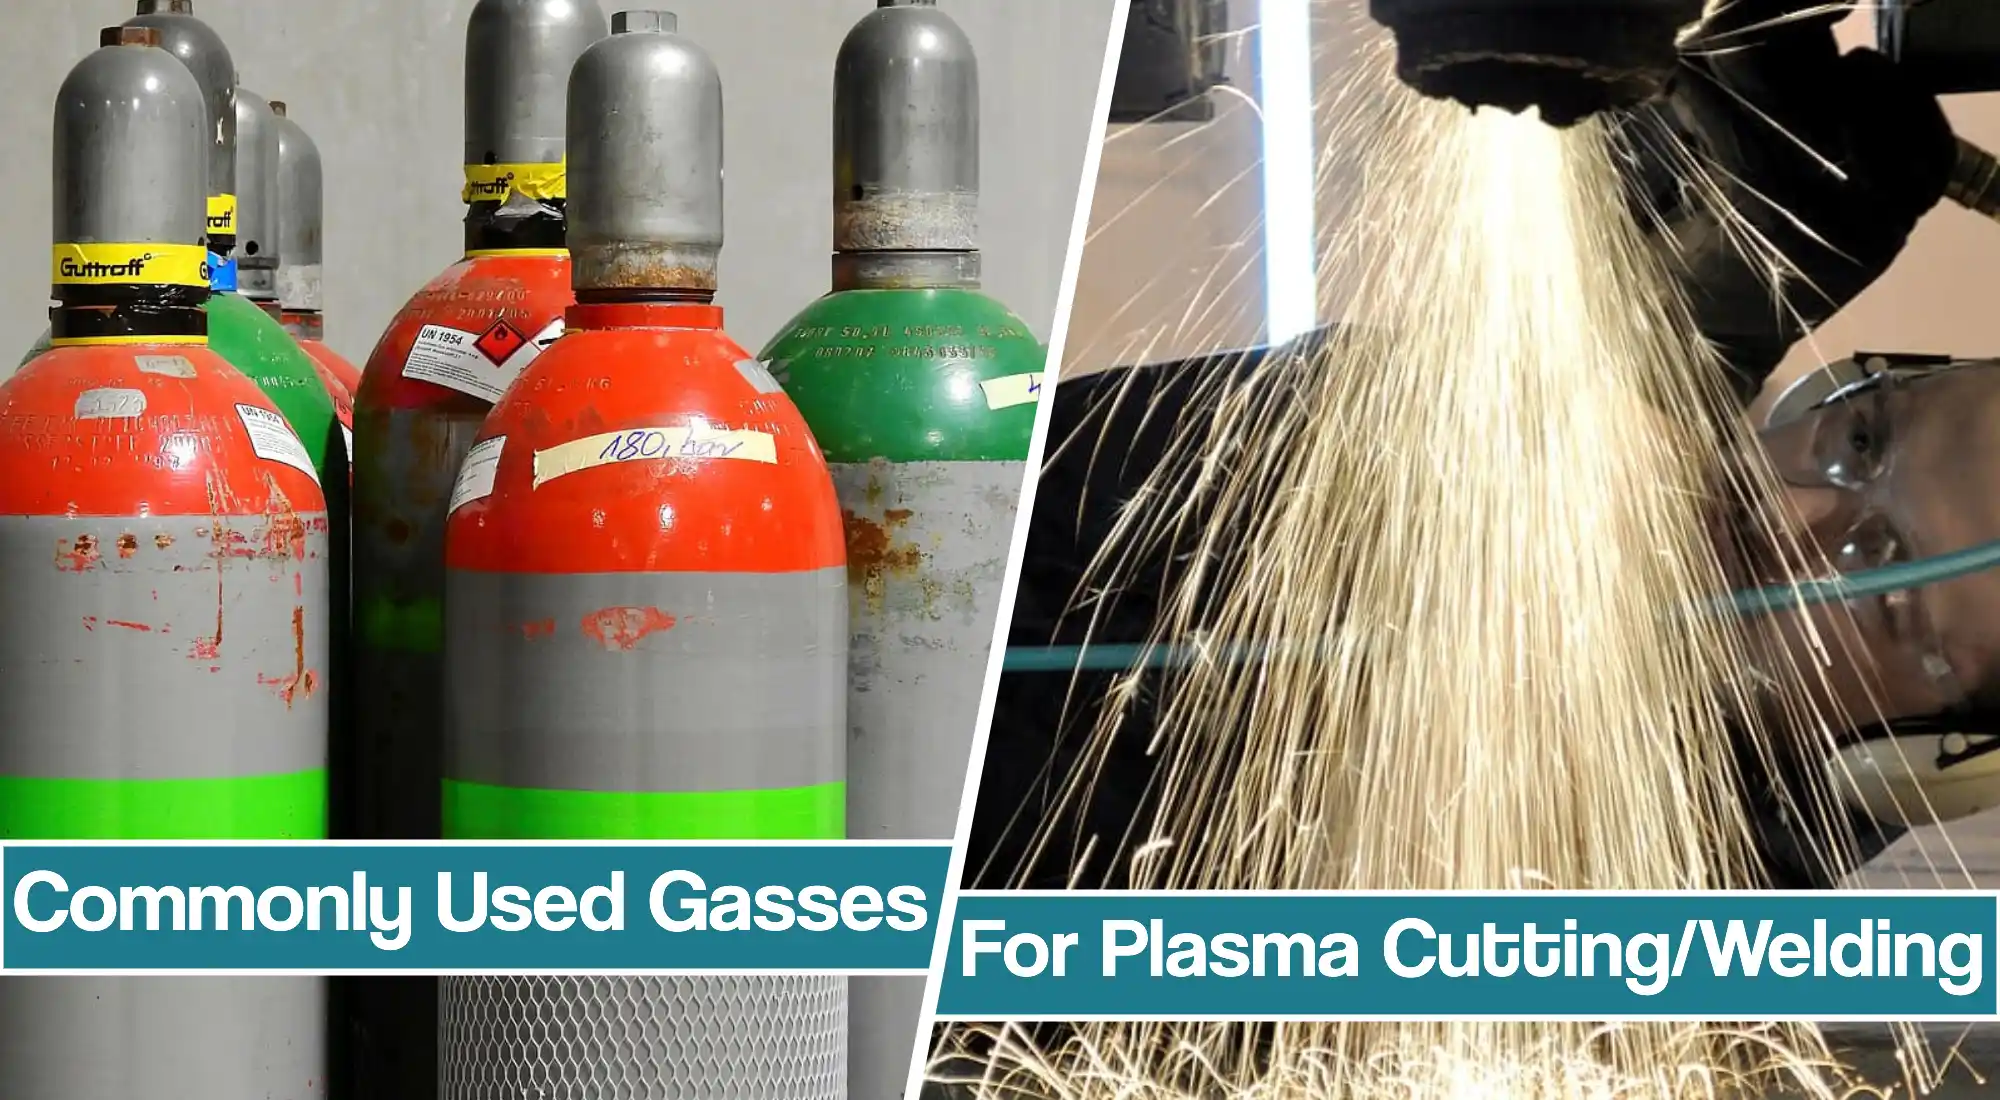 Main Gases used in plasma cutting And Plasma Welding